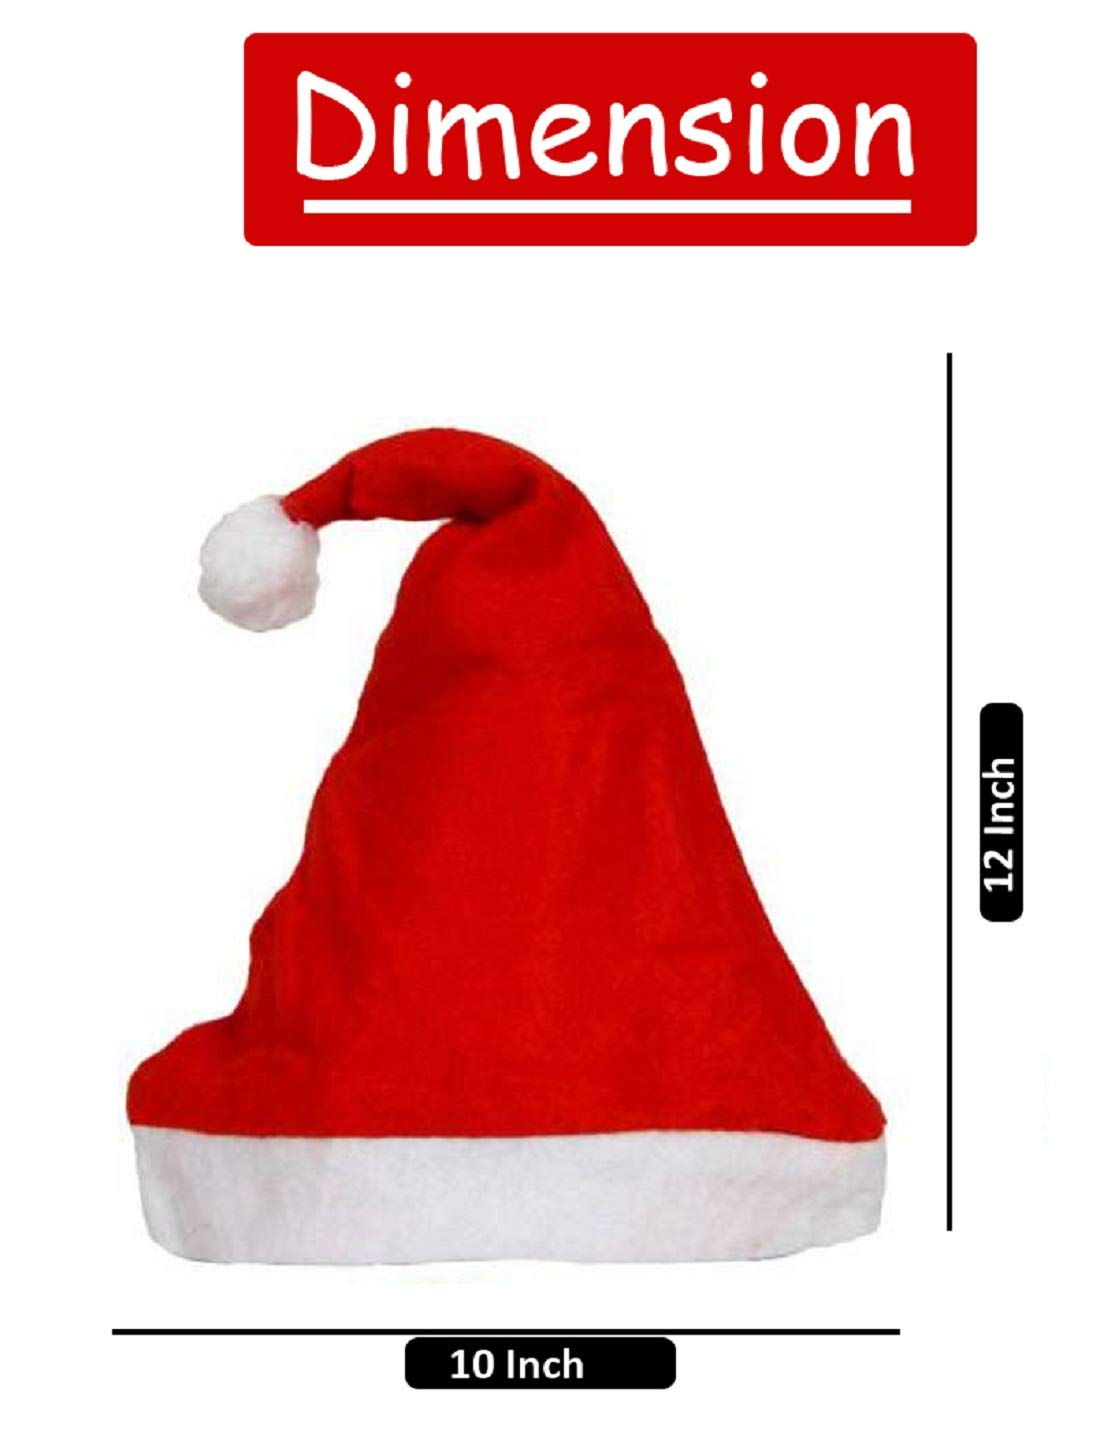 eCraftIndia Red and White Merry Christmas Hats, Santa Claus Caps for kids and Adults - Free Size XMAS Caps, Santa Claus Hats for Christmas, New Year, Festive Holiday Party (Set of 30) 6